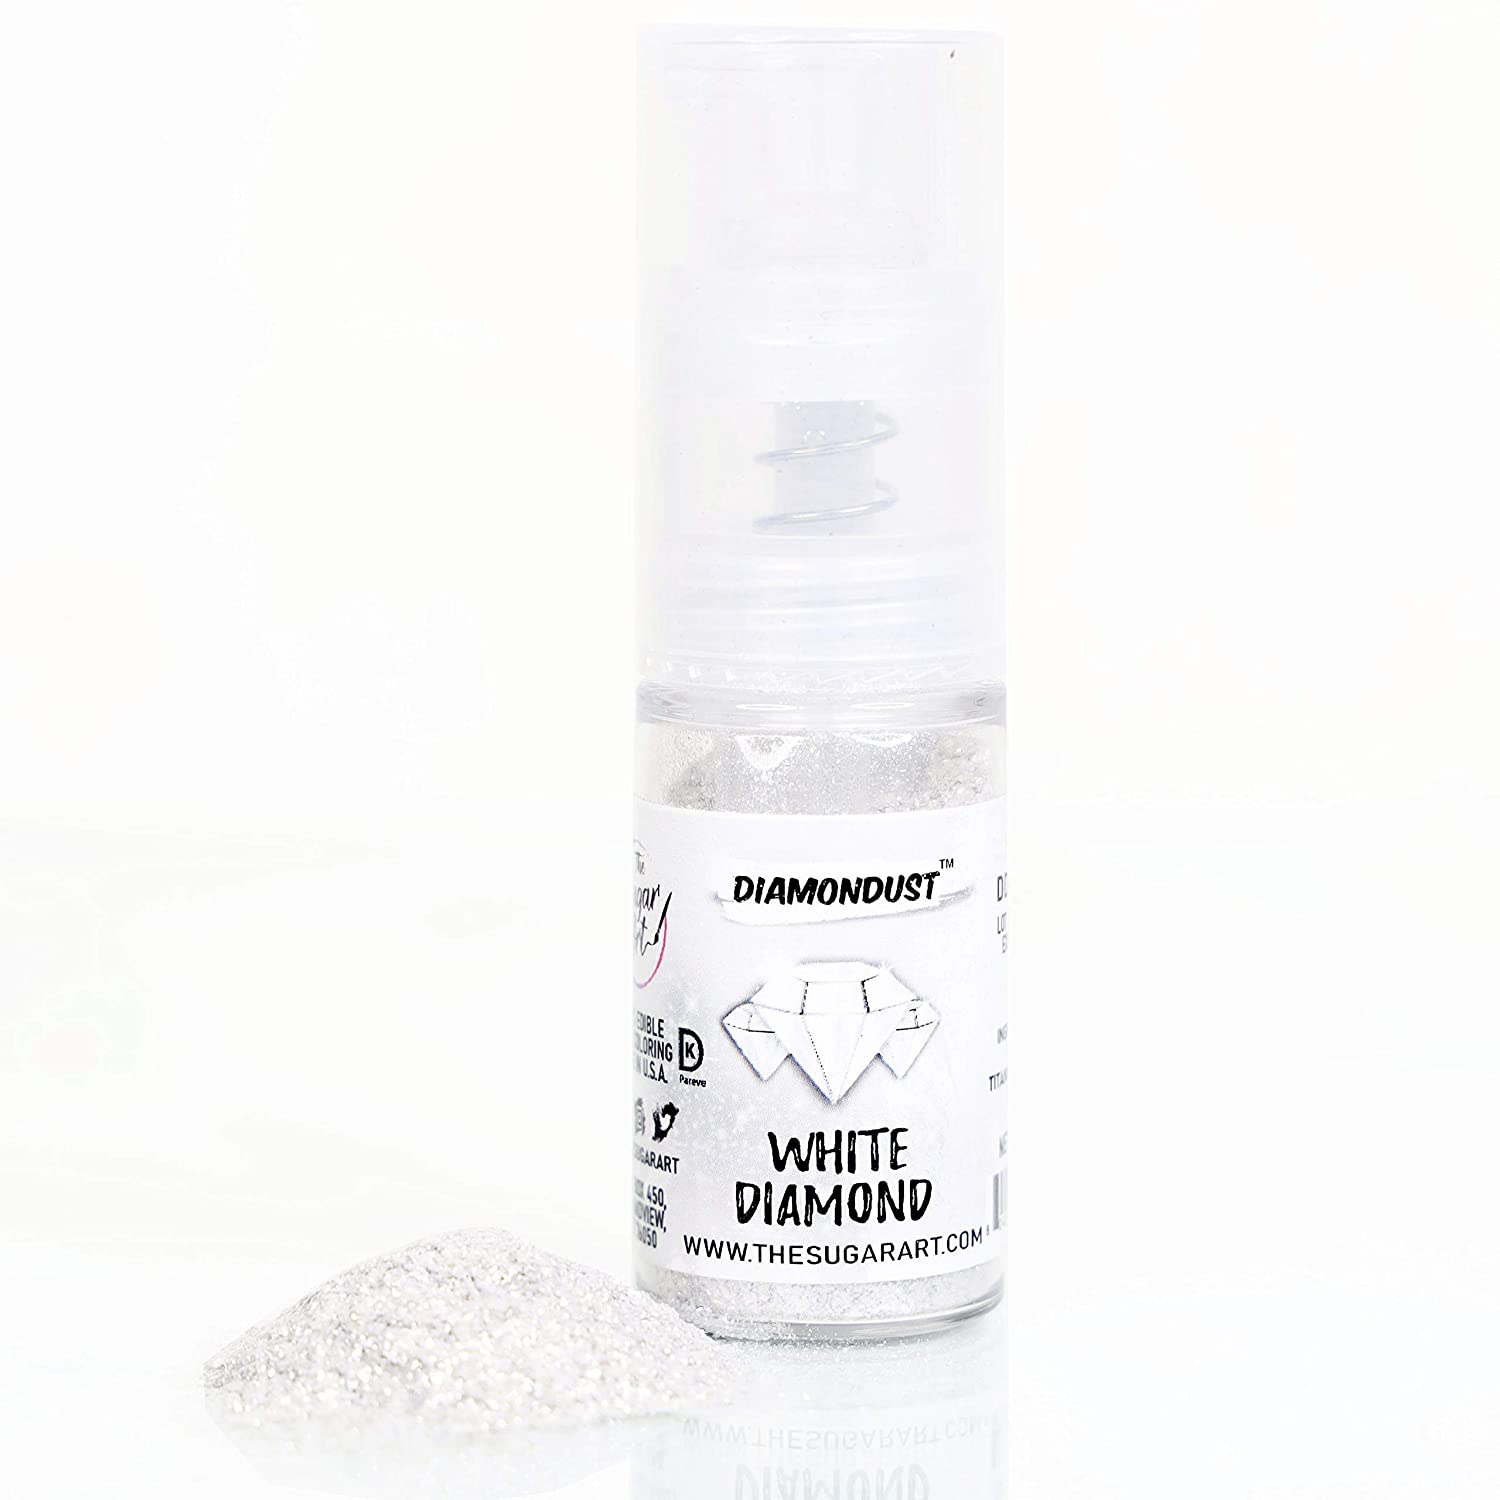 The Sugar Art - DiamonDust - Edible Glitter For Decorating Cakes, Cupcakes, Cake Pops, & More - Sprinkle on Sparkle and Luster to Sweets - Kosher, Food-Grade Coloring - White Diamond - 4g Spray Bottle